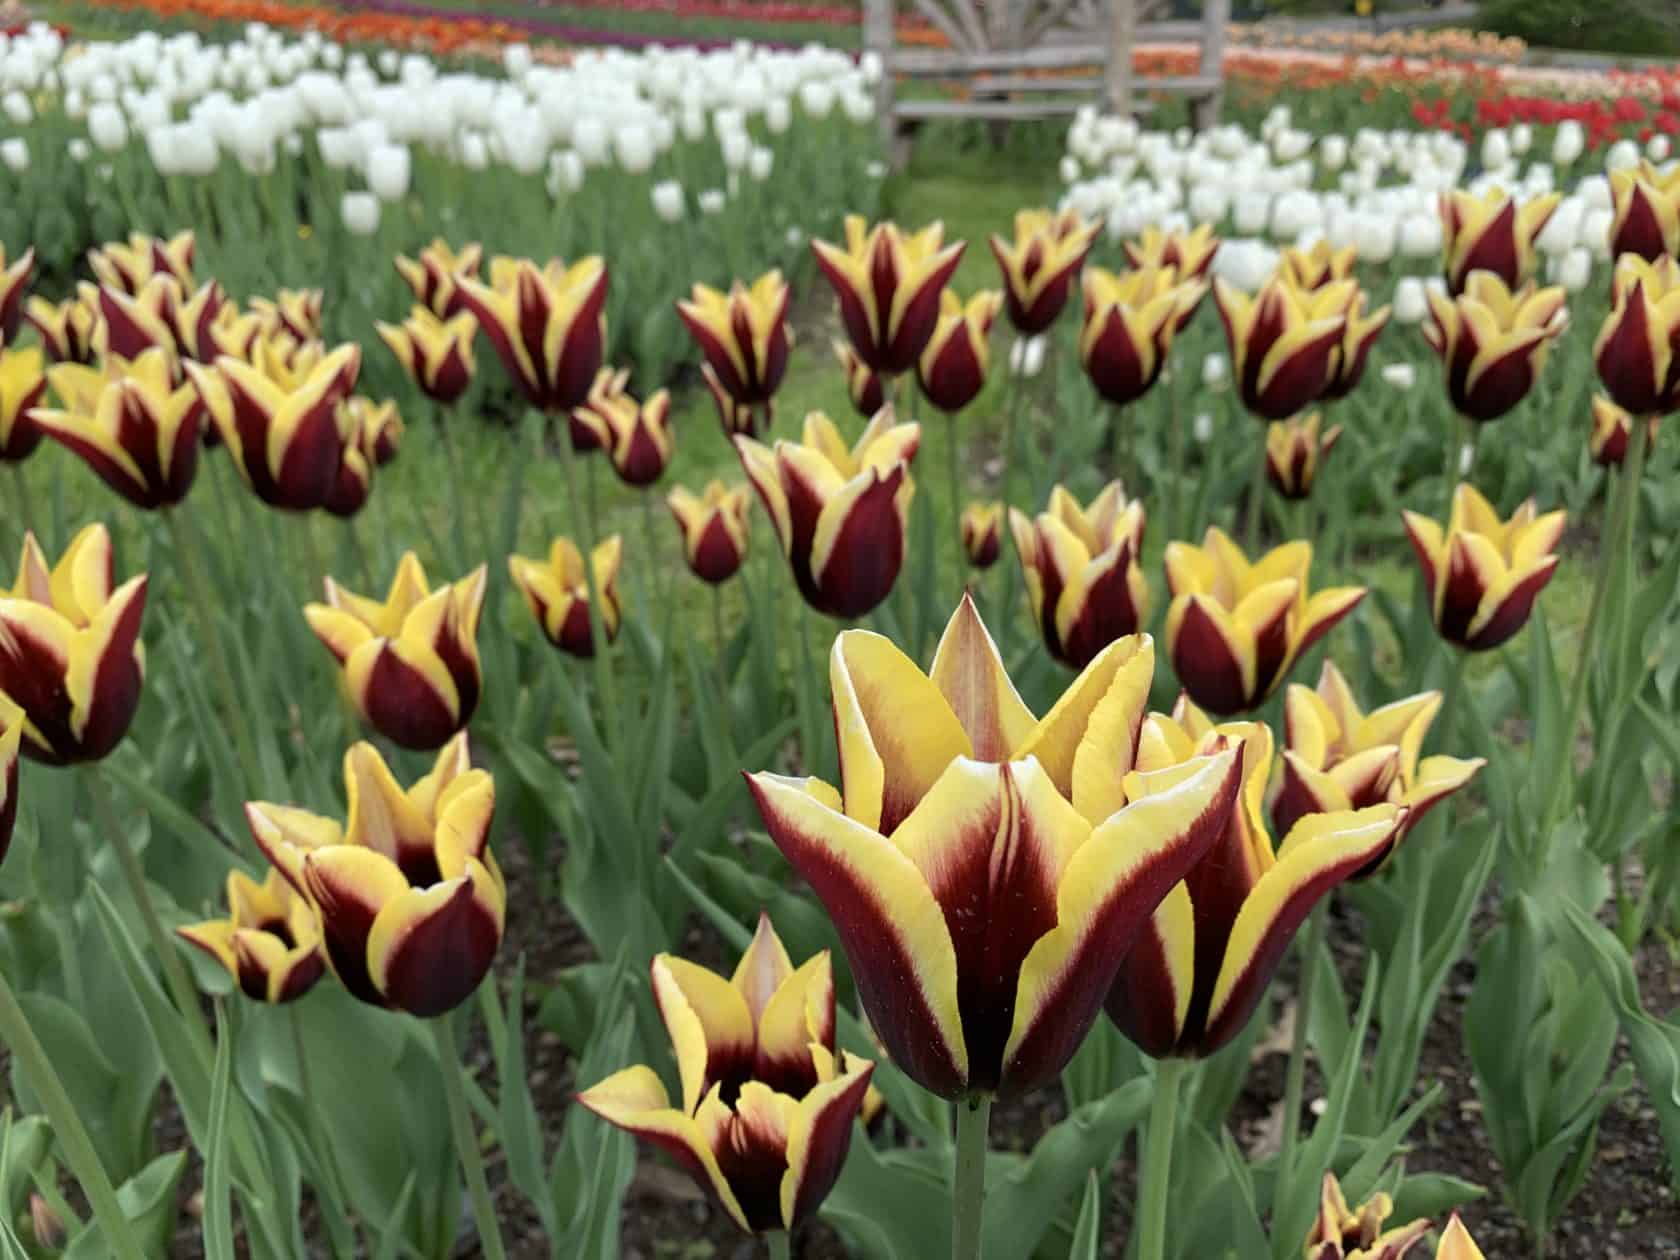 Burgundy and yellow tulips blossoming